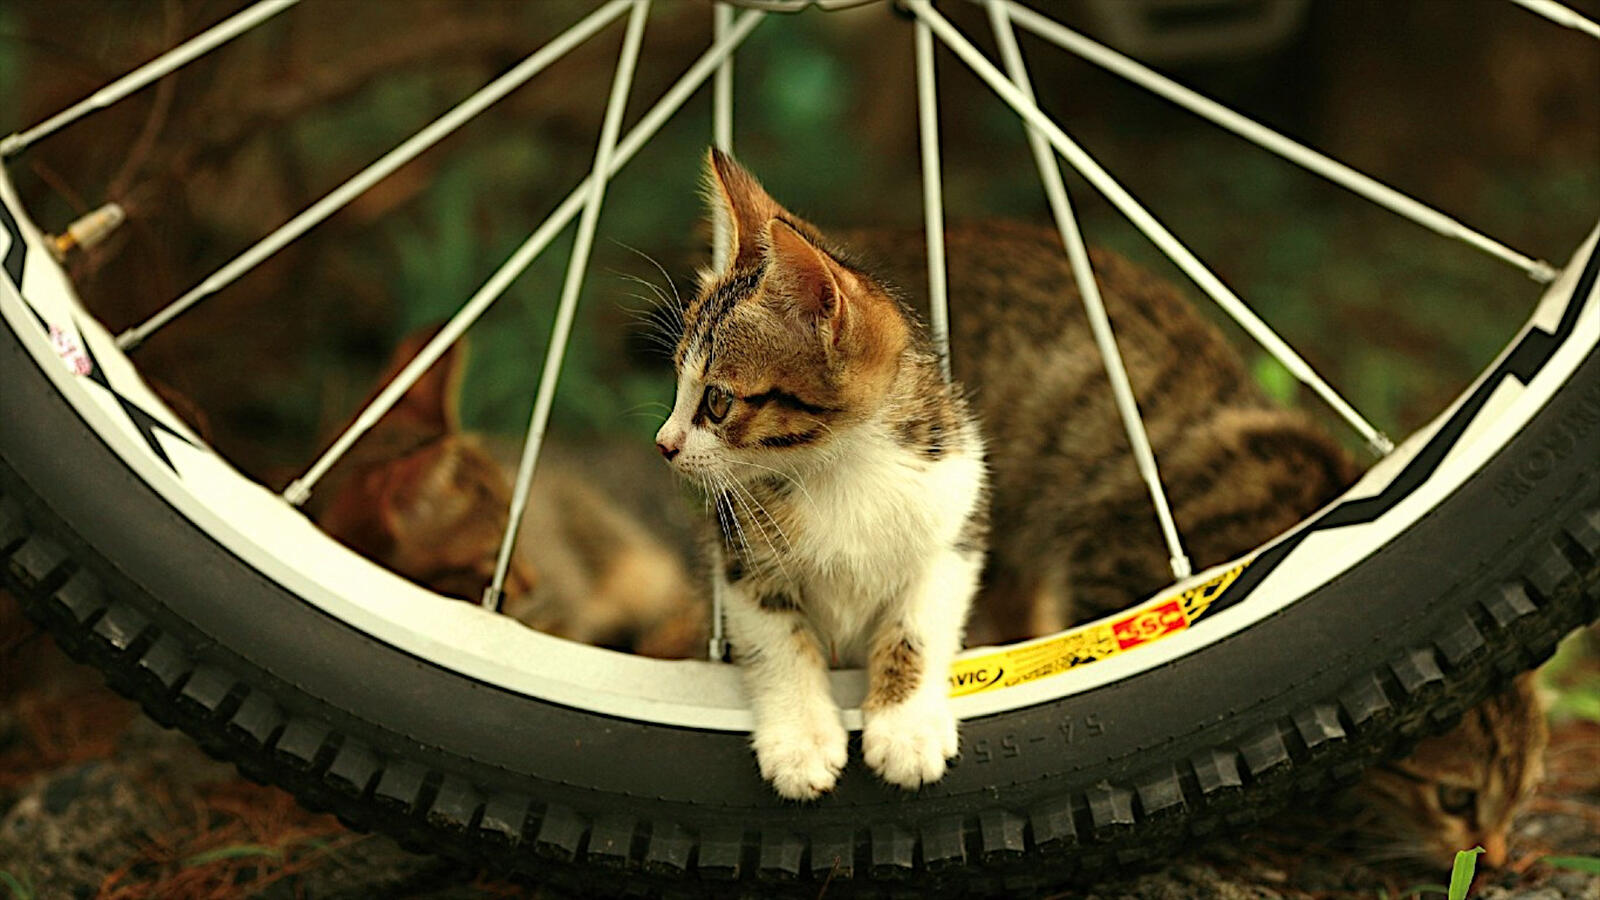 Free photo A little kitten got into the spokes of a bicycle